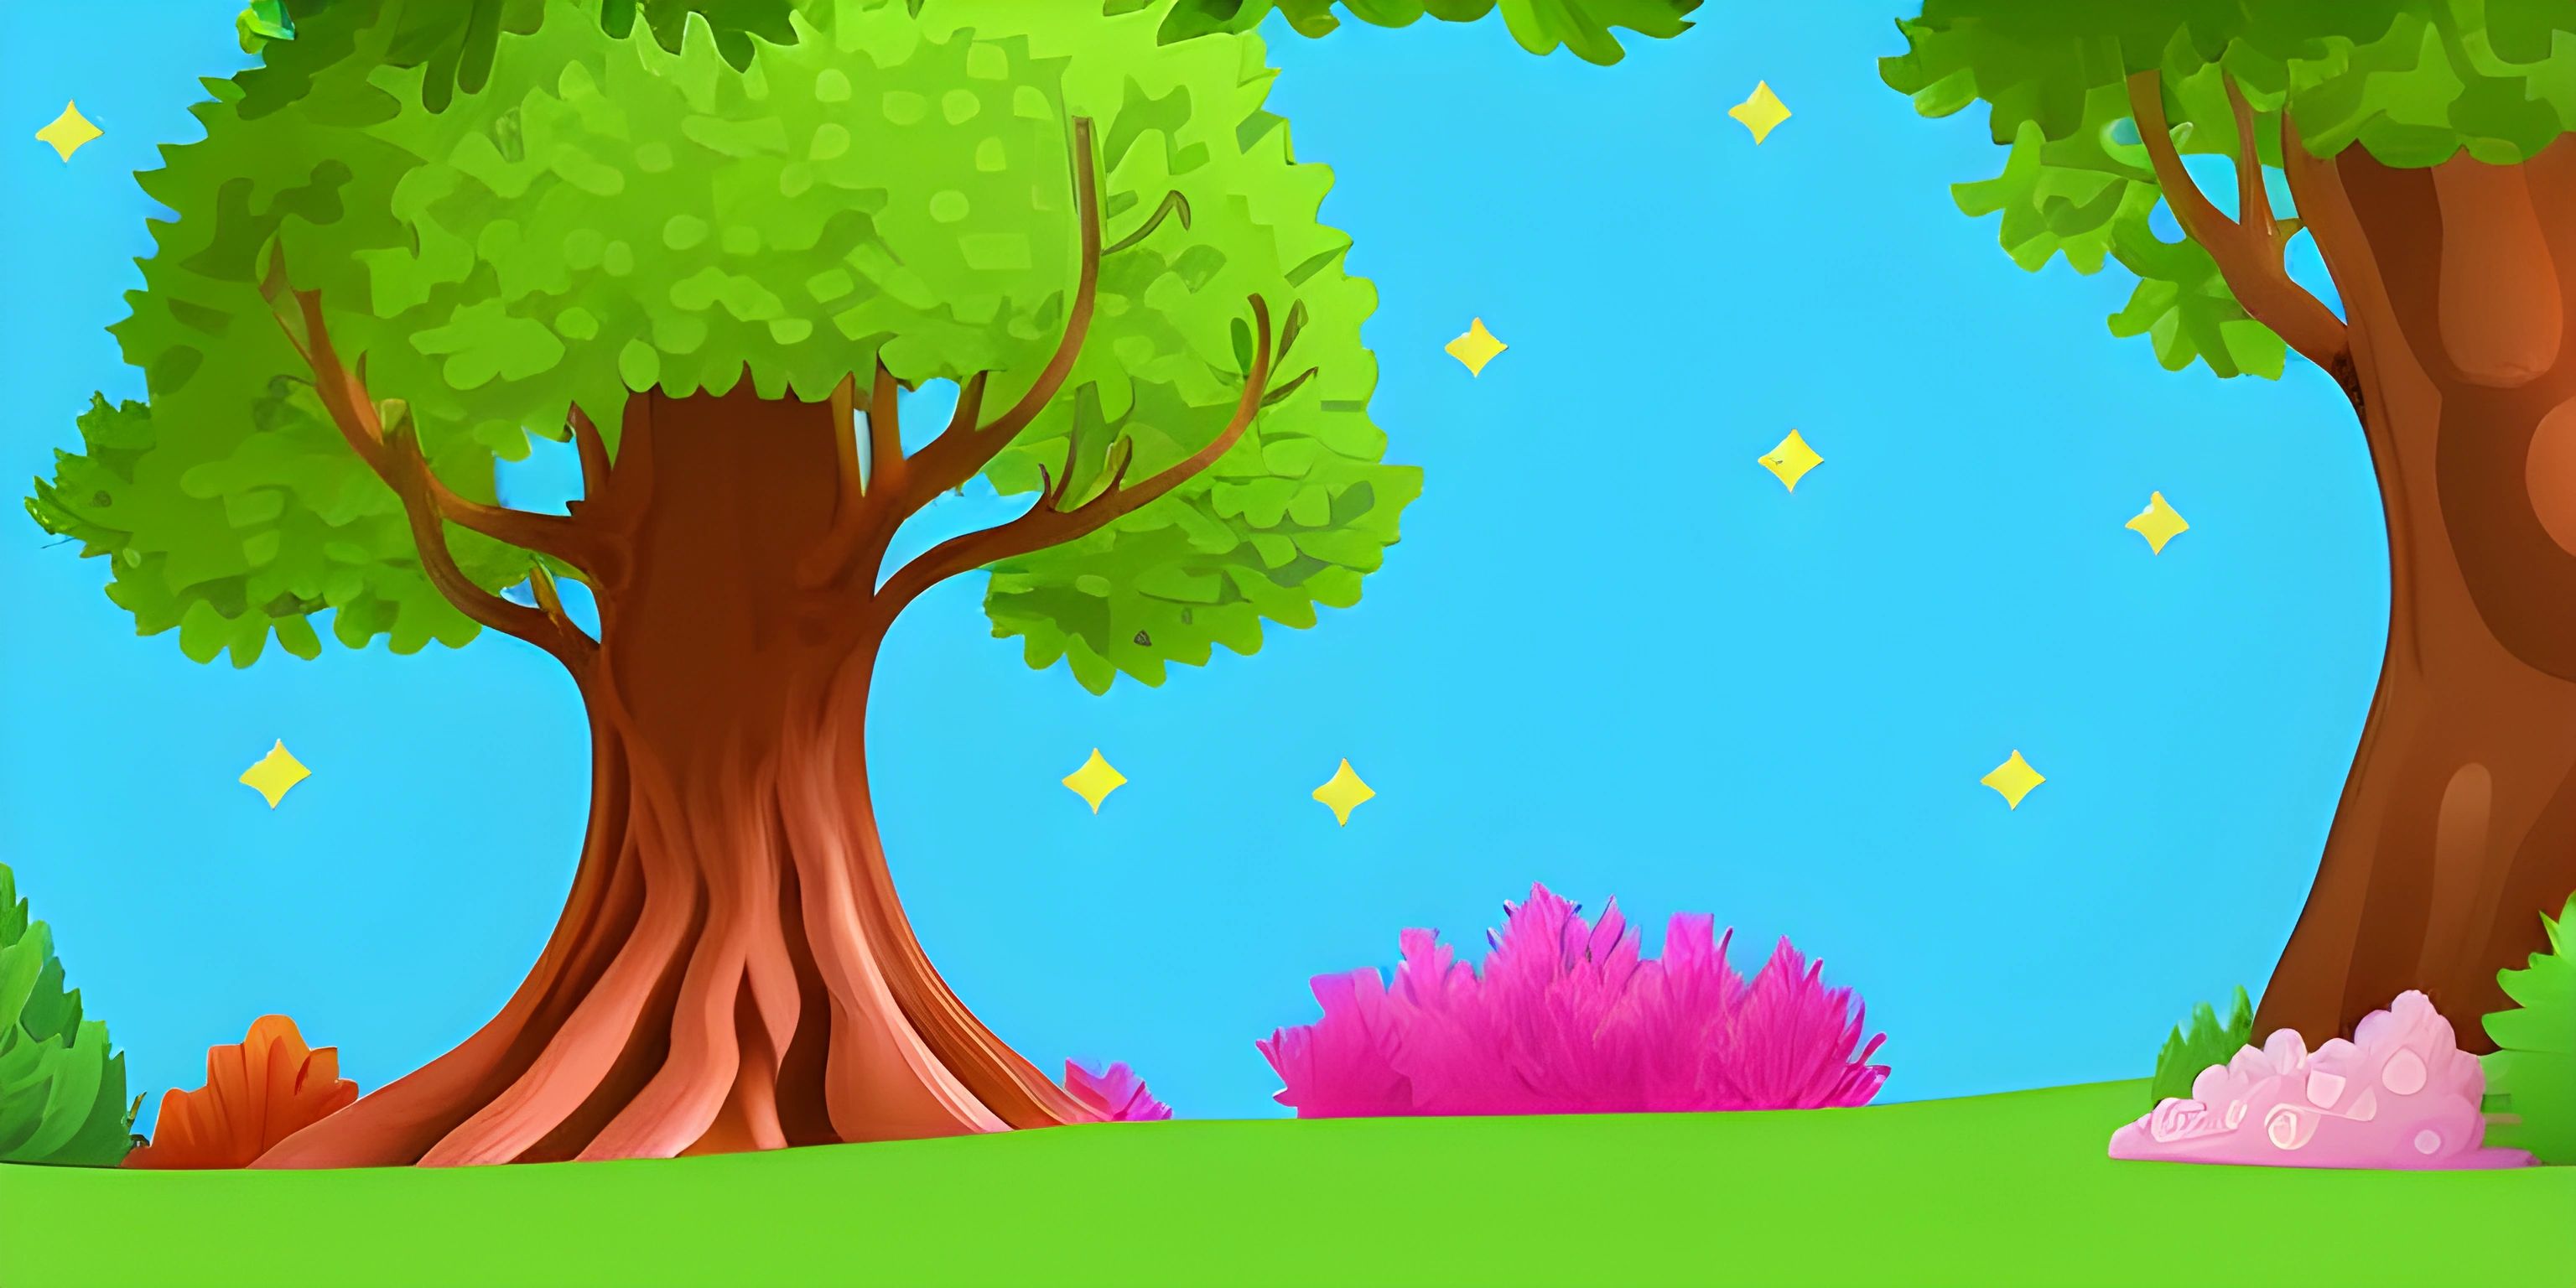 the cartoon is very colorful and the tree is full of leaves, with lots of flowers and grass